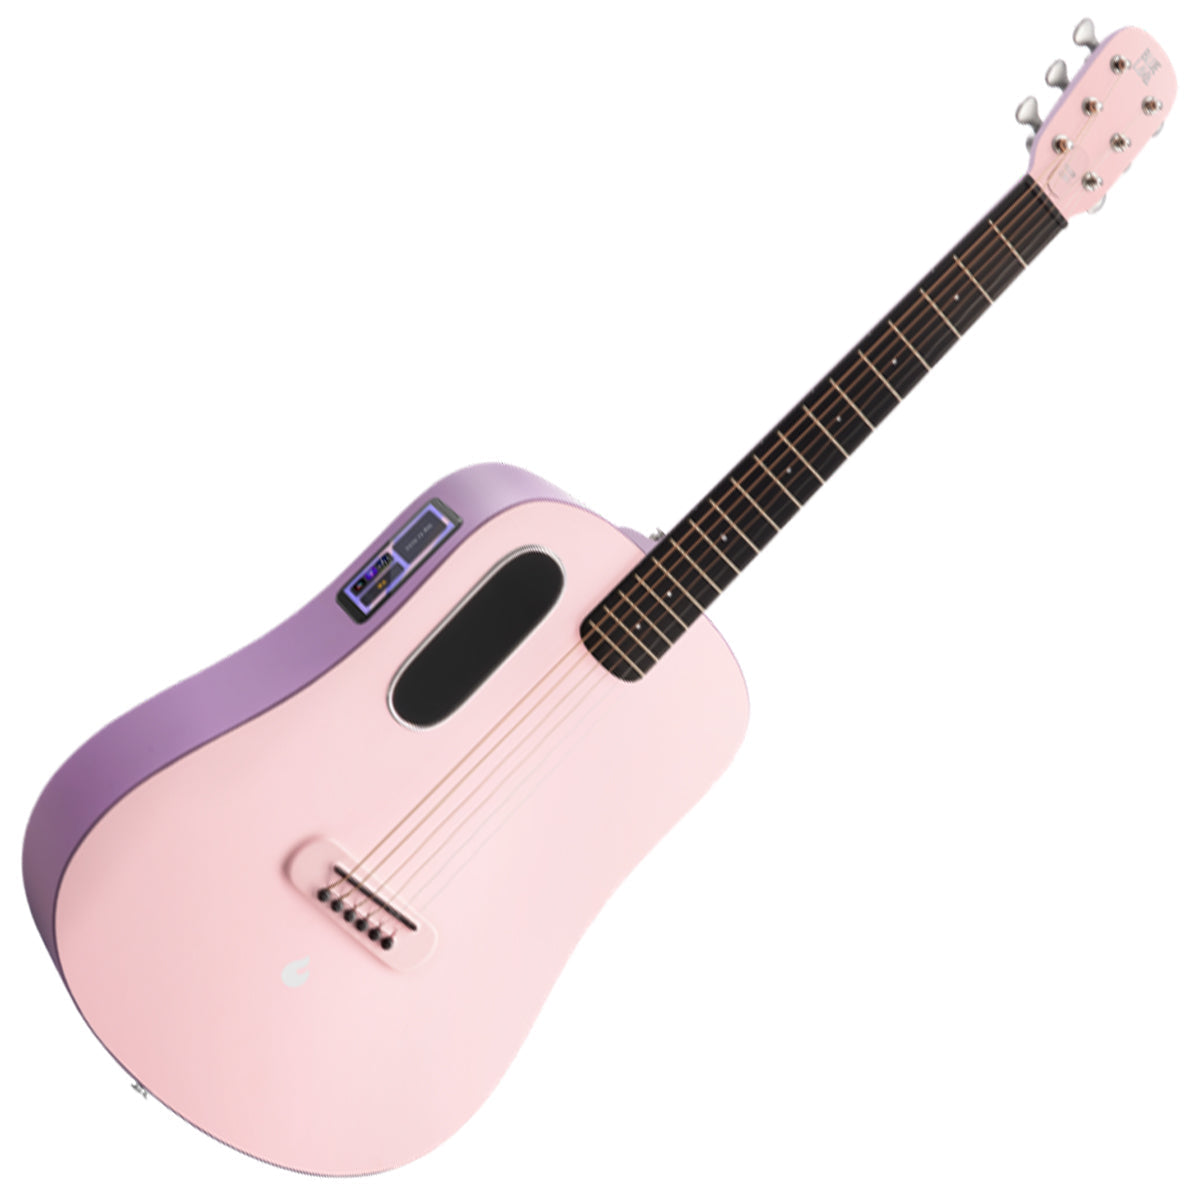 BLUE LAVA TOUCH with Airflow Bag ~ Coral Pink / Lavender, Acoustic Guitar for sale at Richards Guitars.